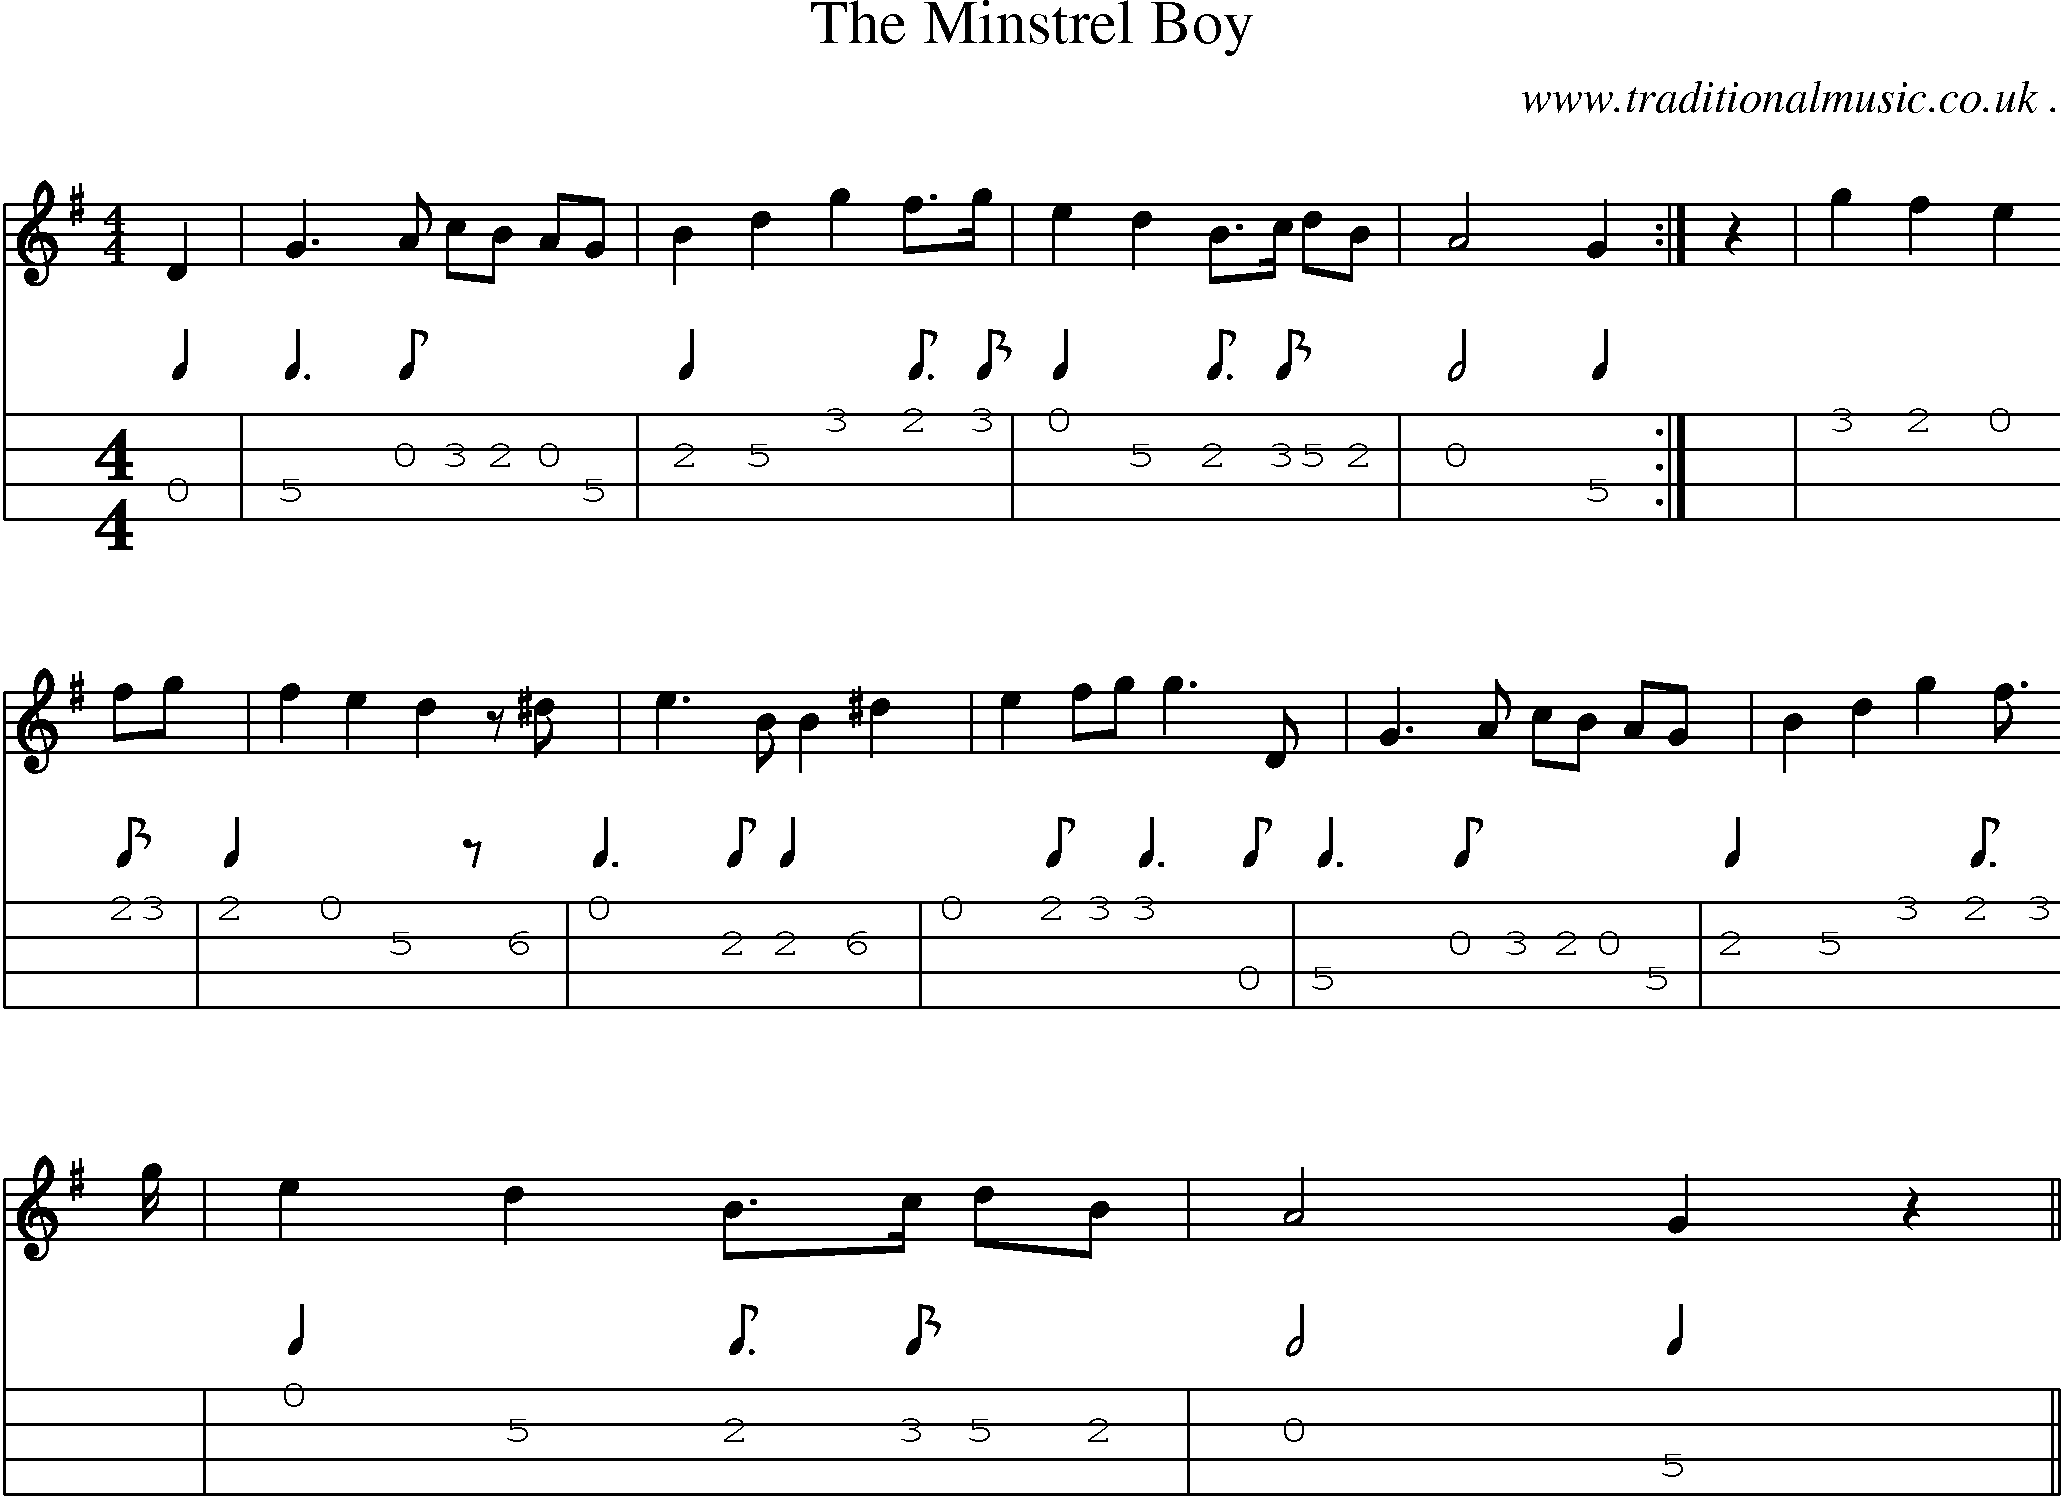 Music Score and Guitar Tabs for The Minstrel Boy